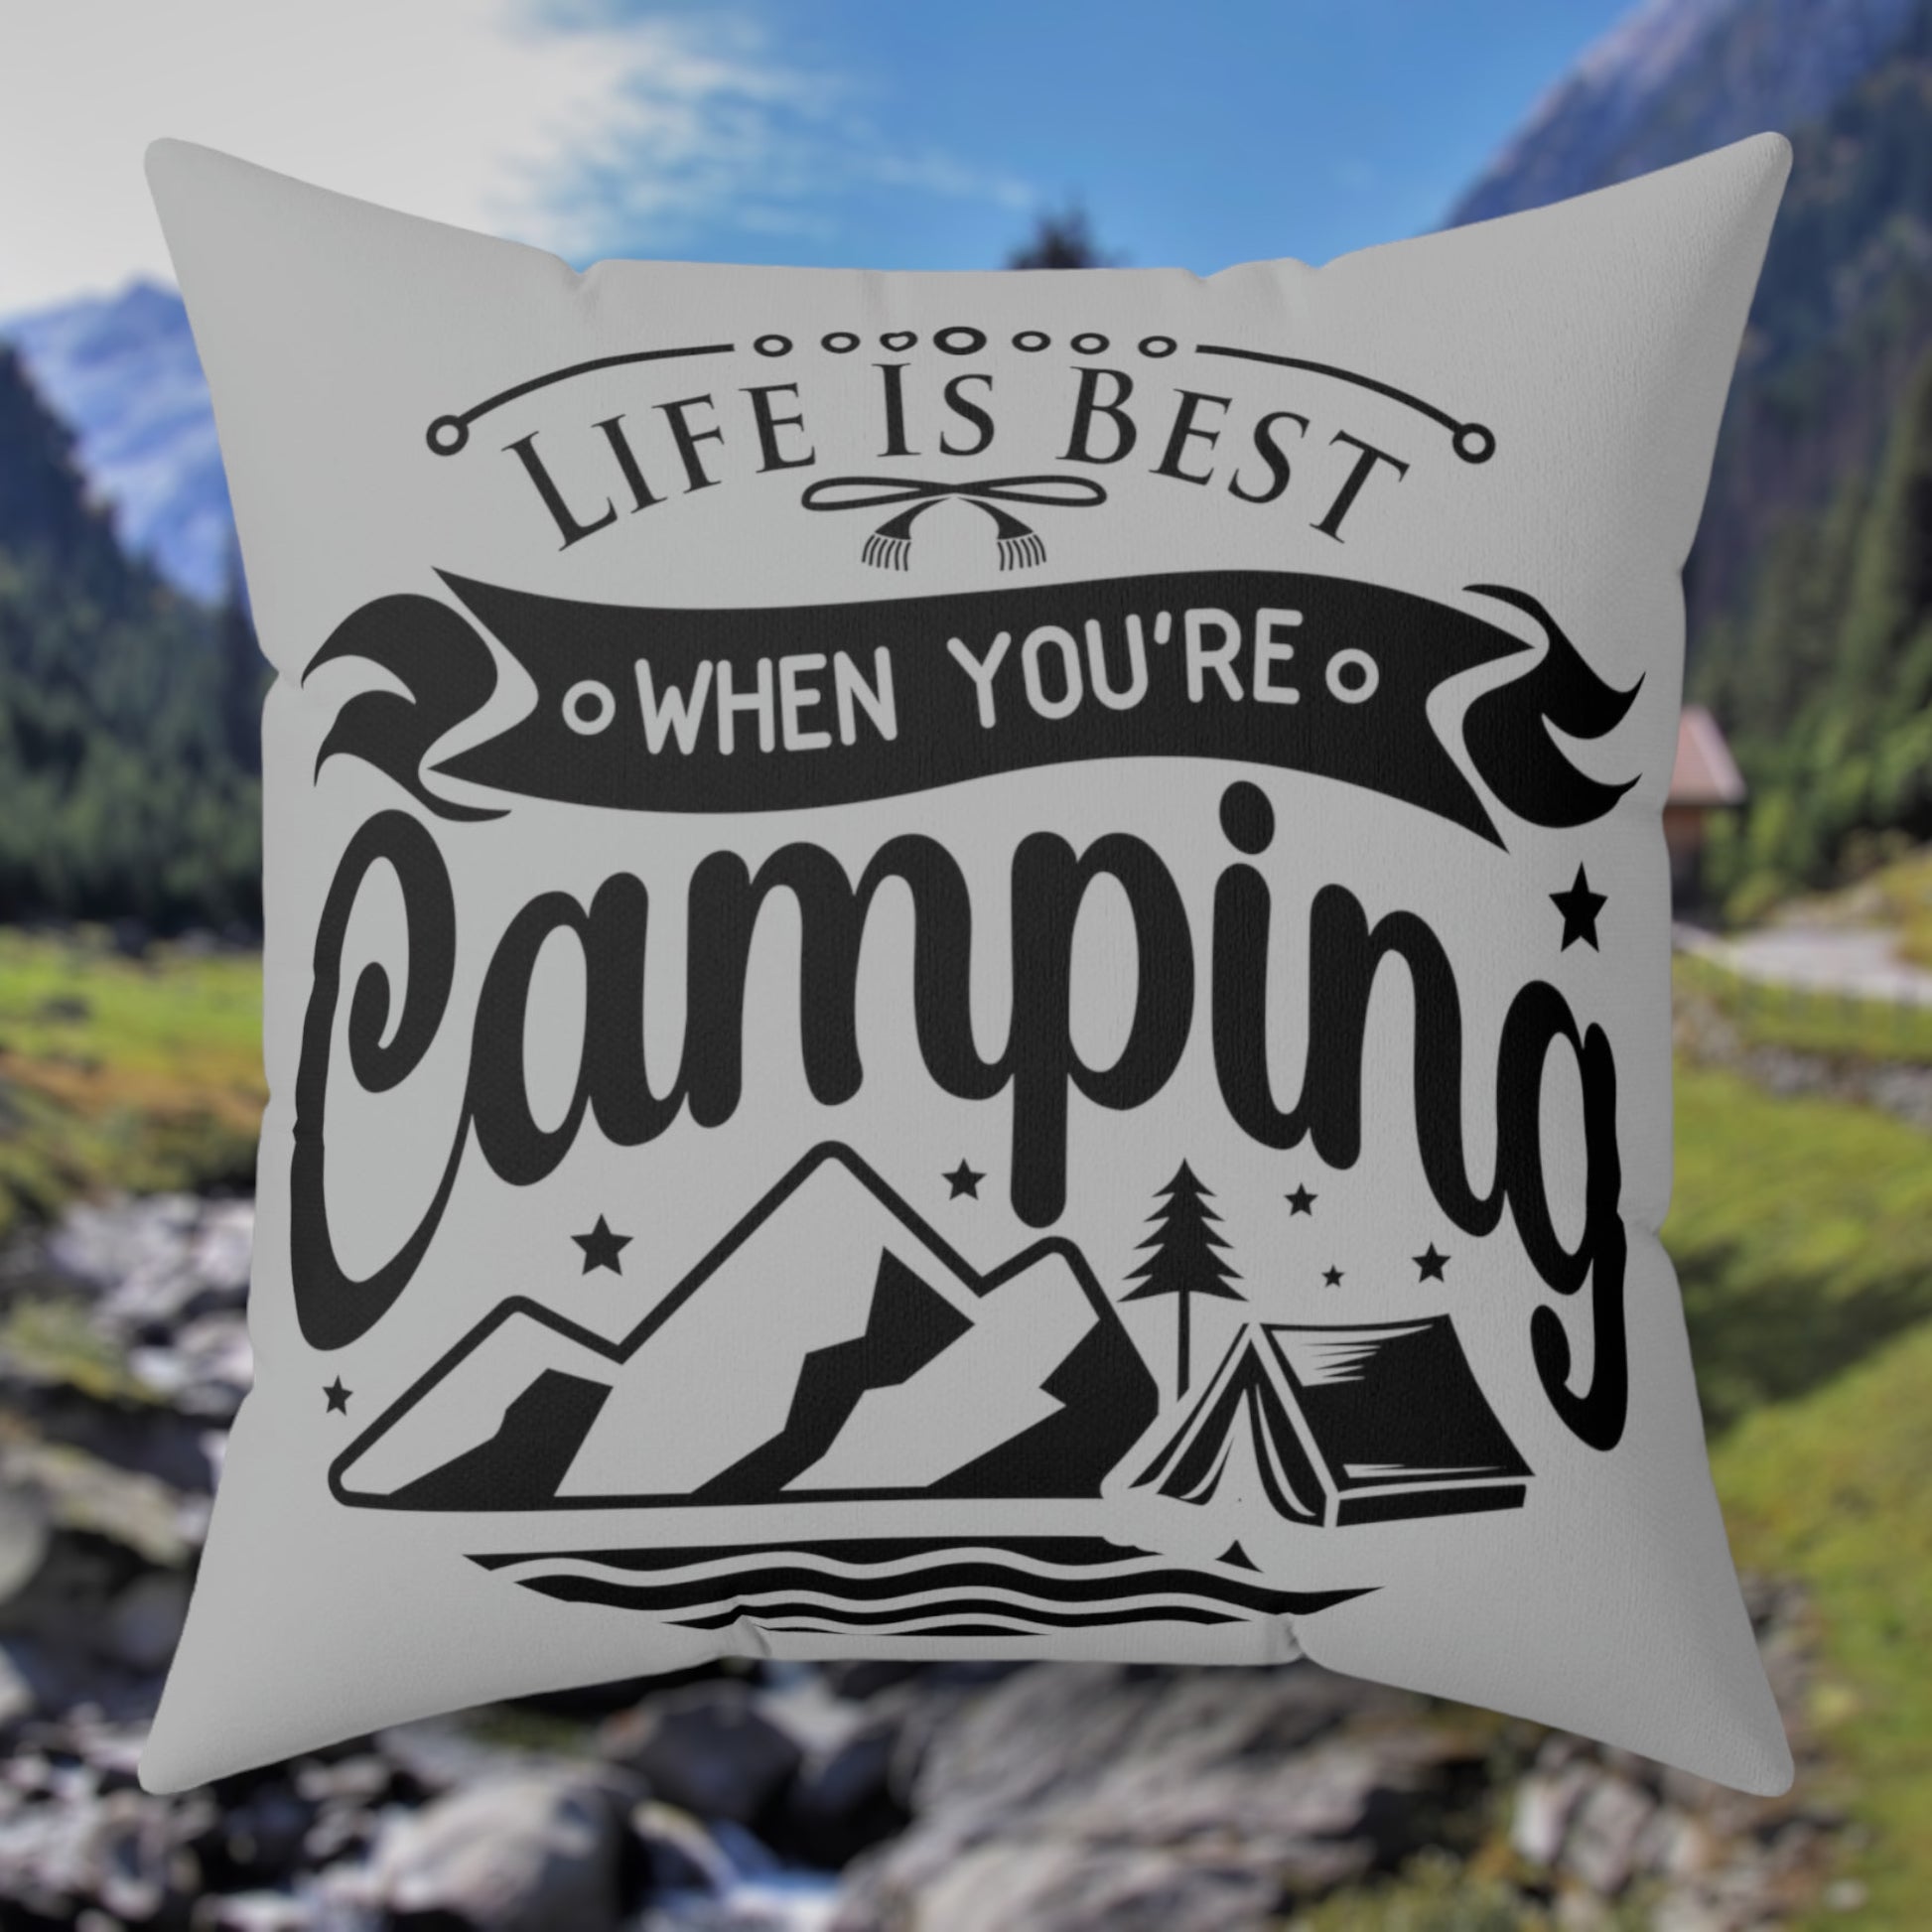 "Life Is Best When You're Camping" Throw Pillow - Weave Got Gifts - Unique Gifts You Won’t Find Anywhere Else!